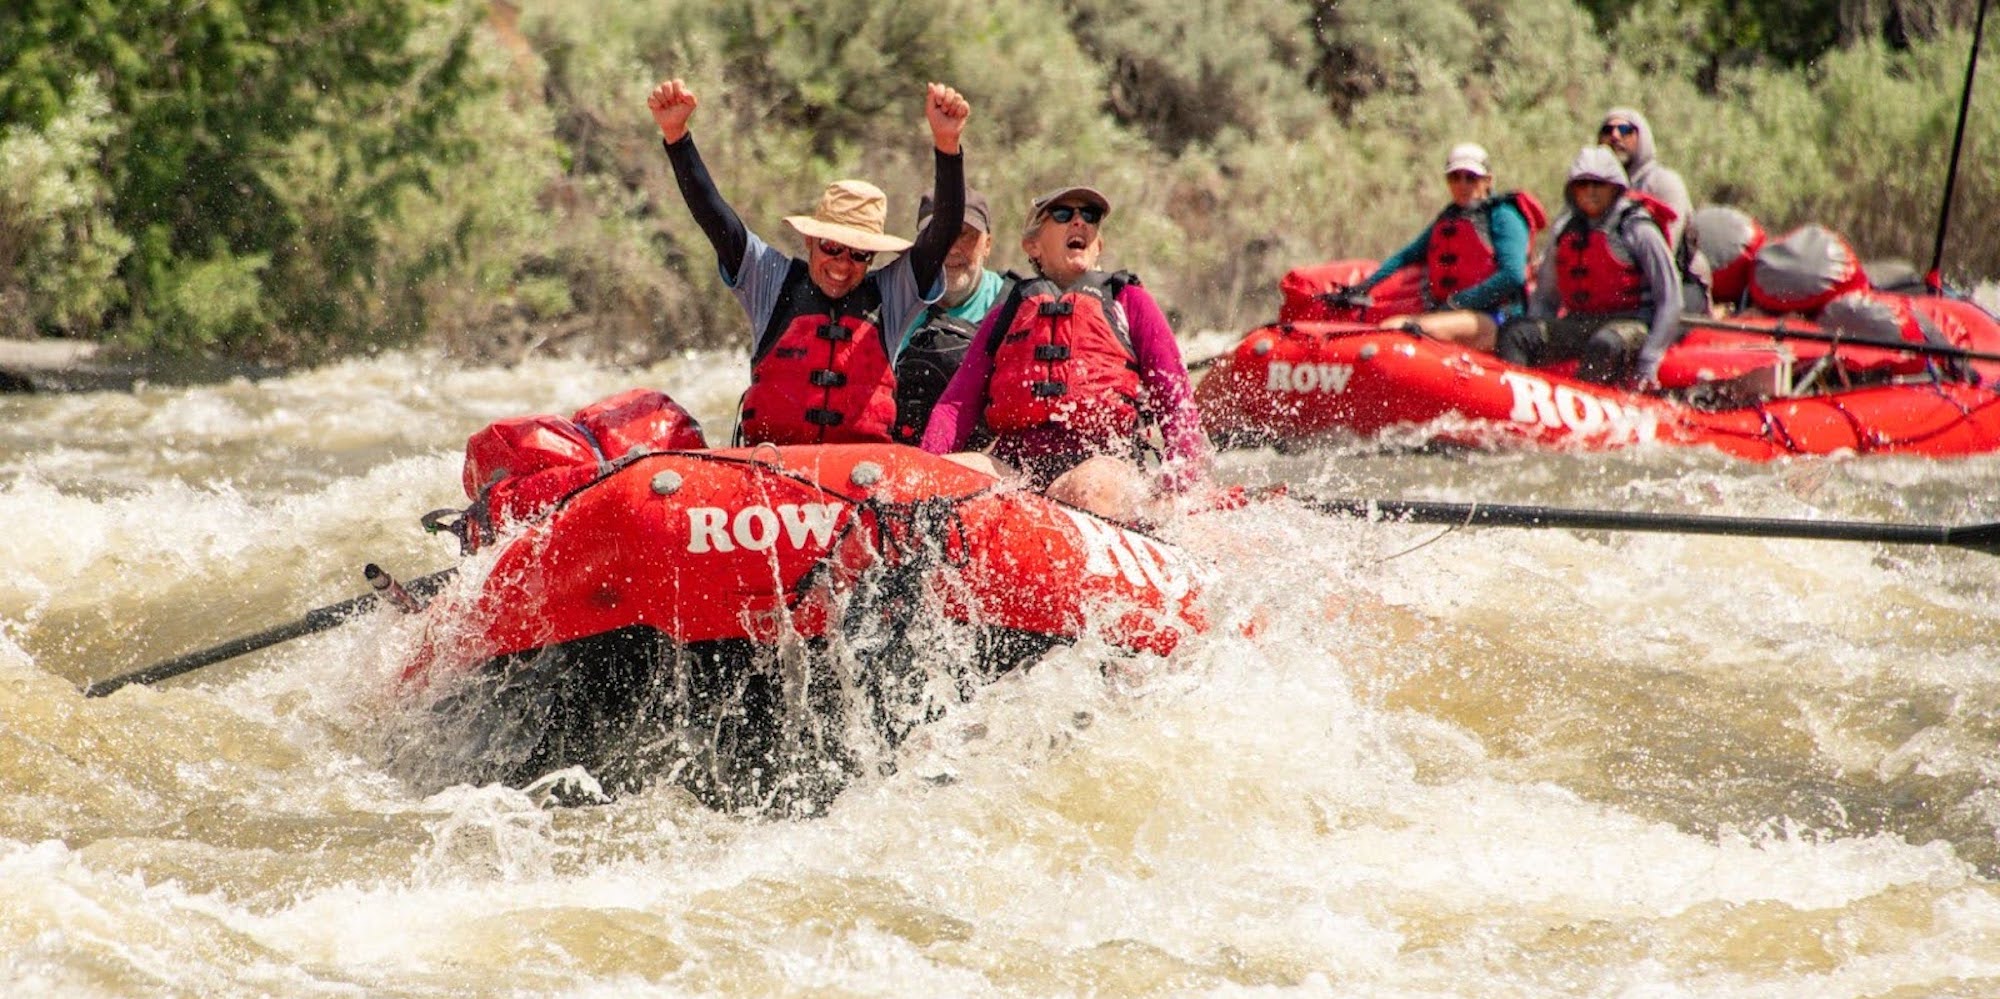 ROW Adventures guests smiling through the rapids of the Bruneau River